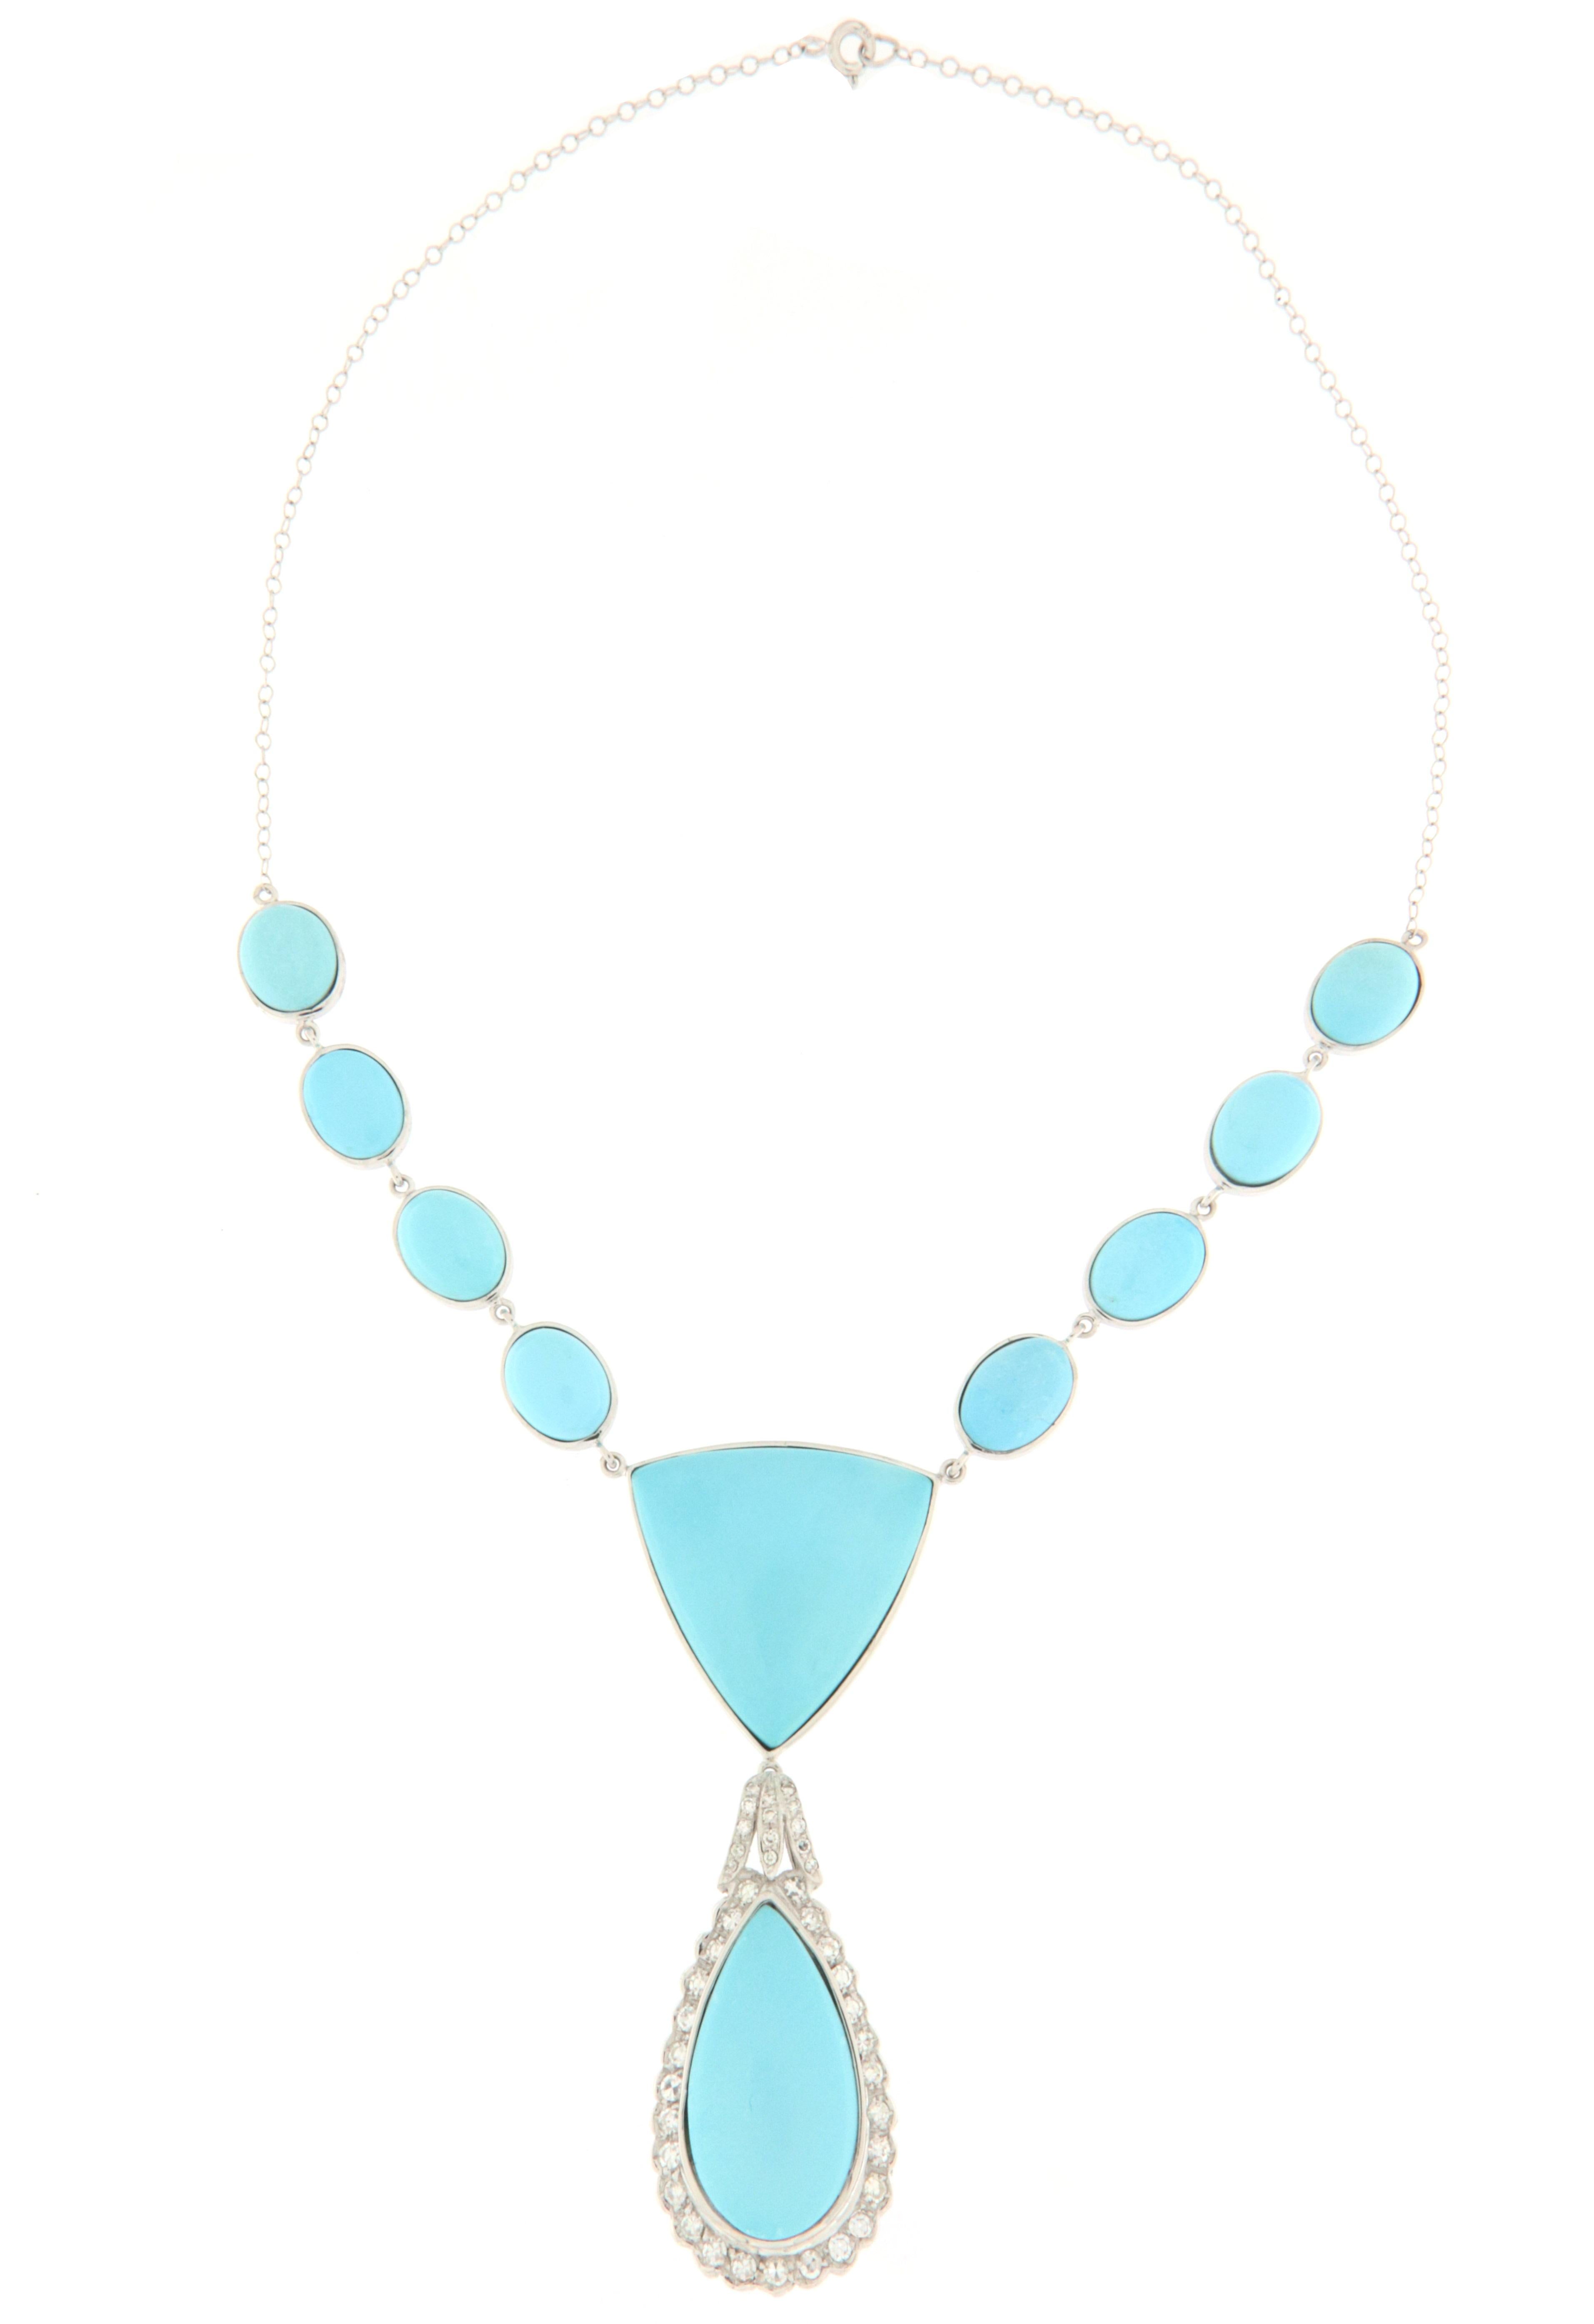 This necklace in 18-karat white gold is a masterpiece of rare beauty, embodying elegance and sophisticated charm. At the heart of this unique piece of jewelry, a drop of turquoise, with its deep blue color reminiscent of tropical seas, is